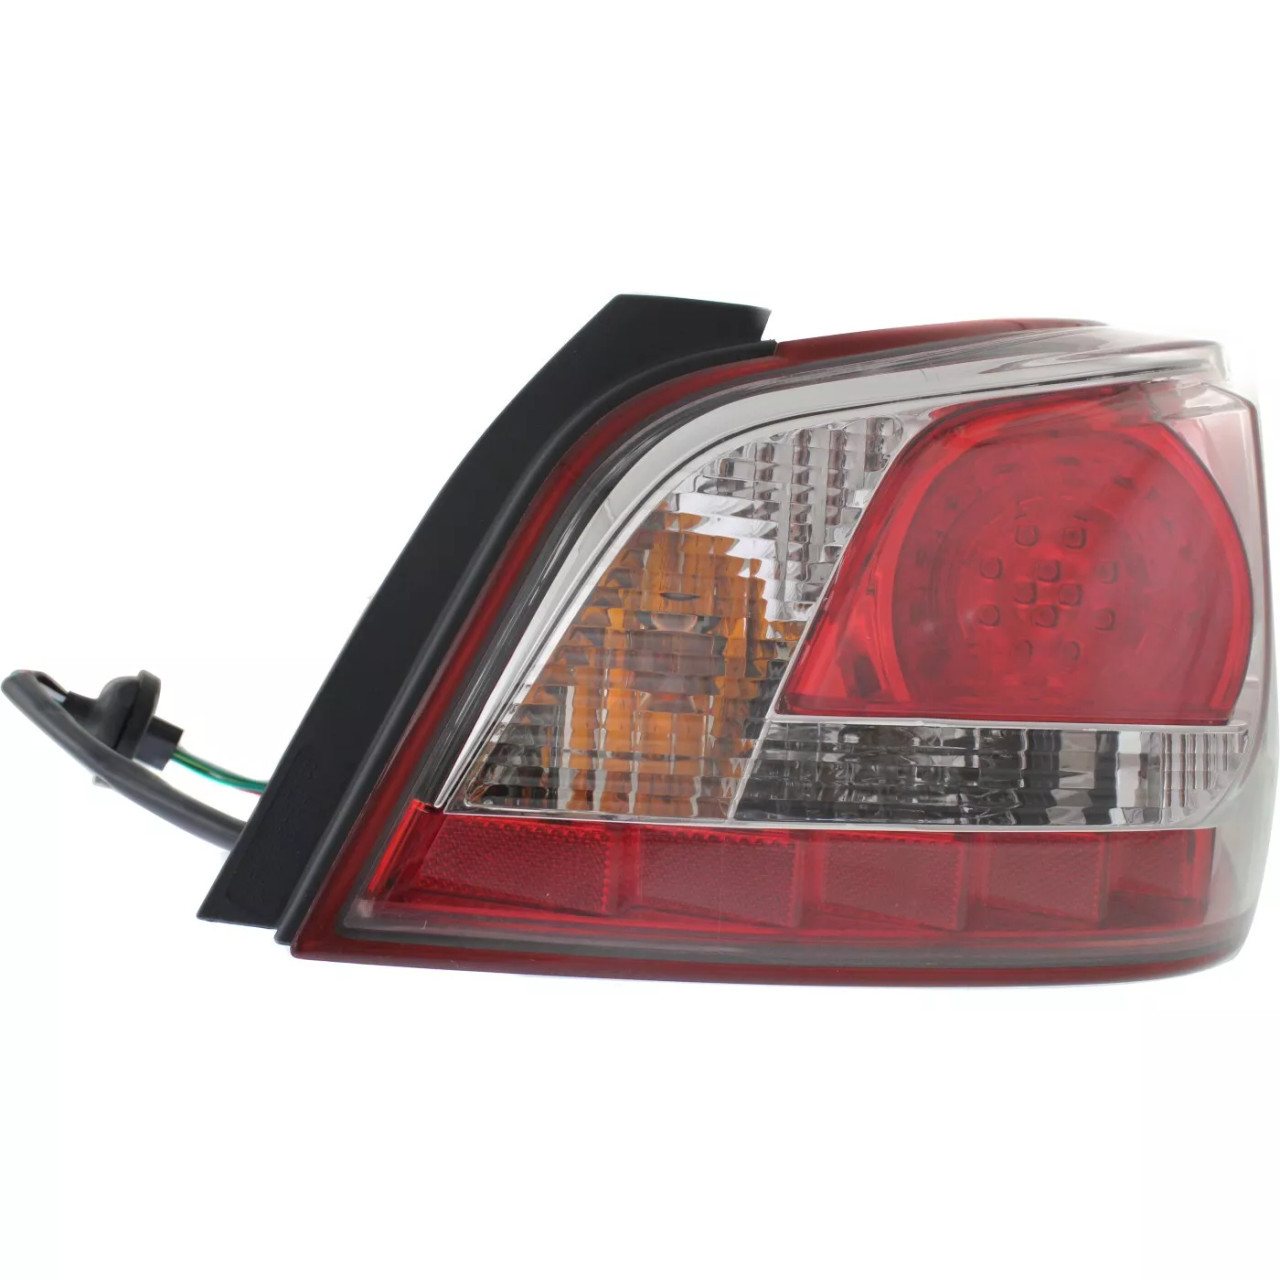 LED Tail Light For 2013 Nissan Altima Sedan Right Clear & Red Lens w/ Bulbs